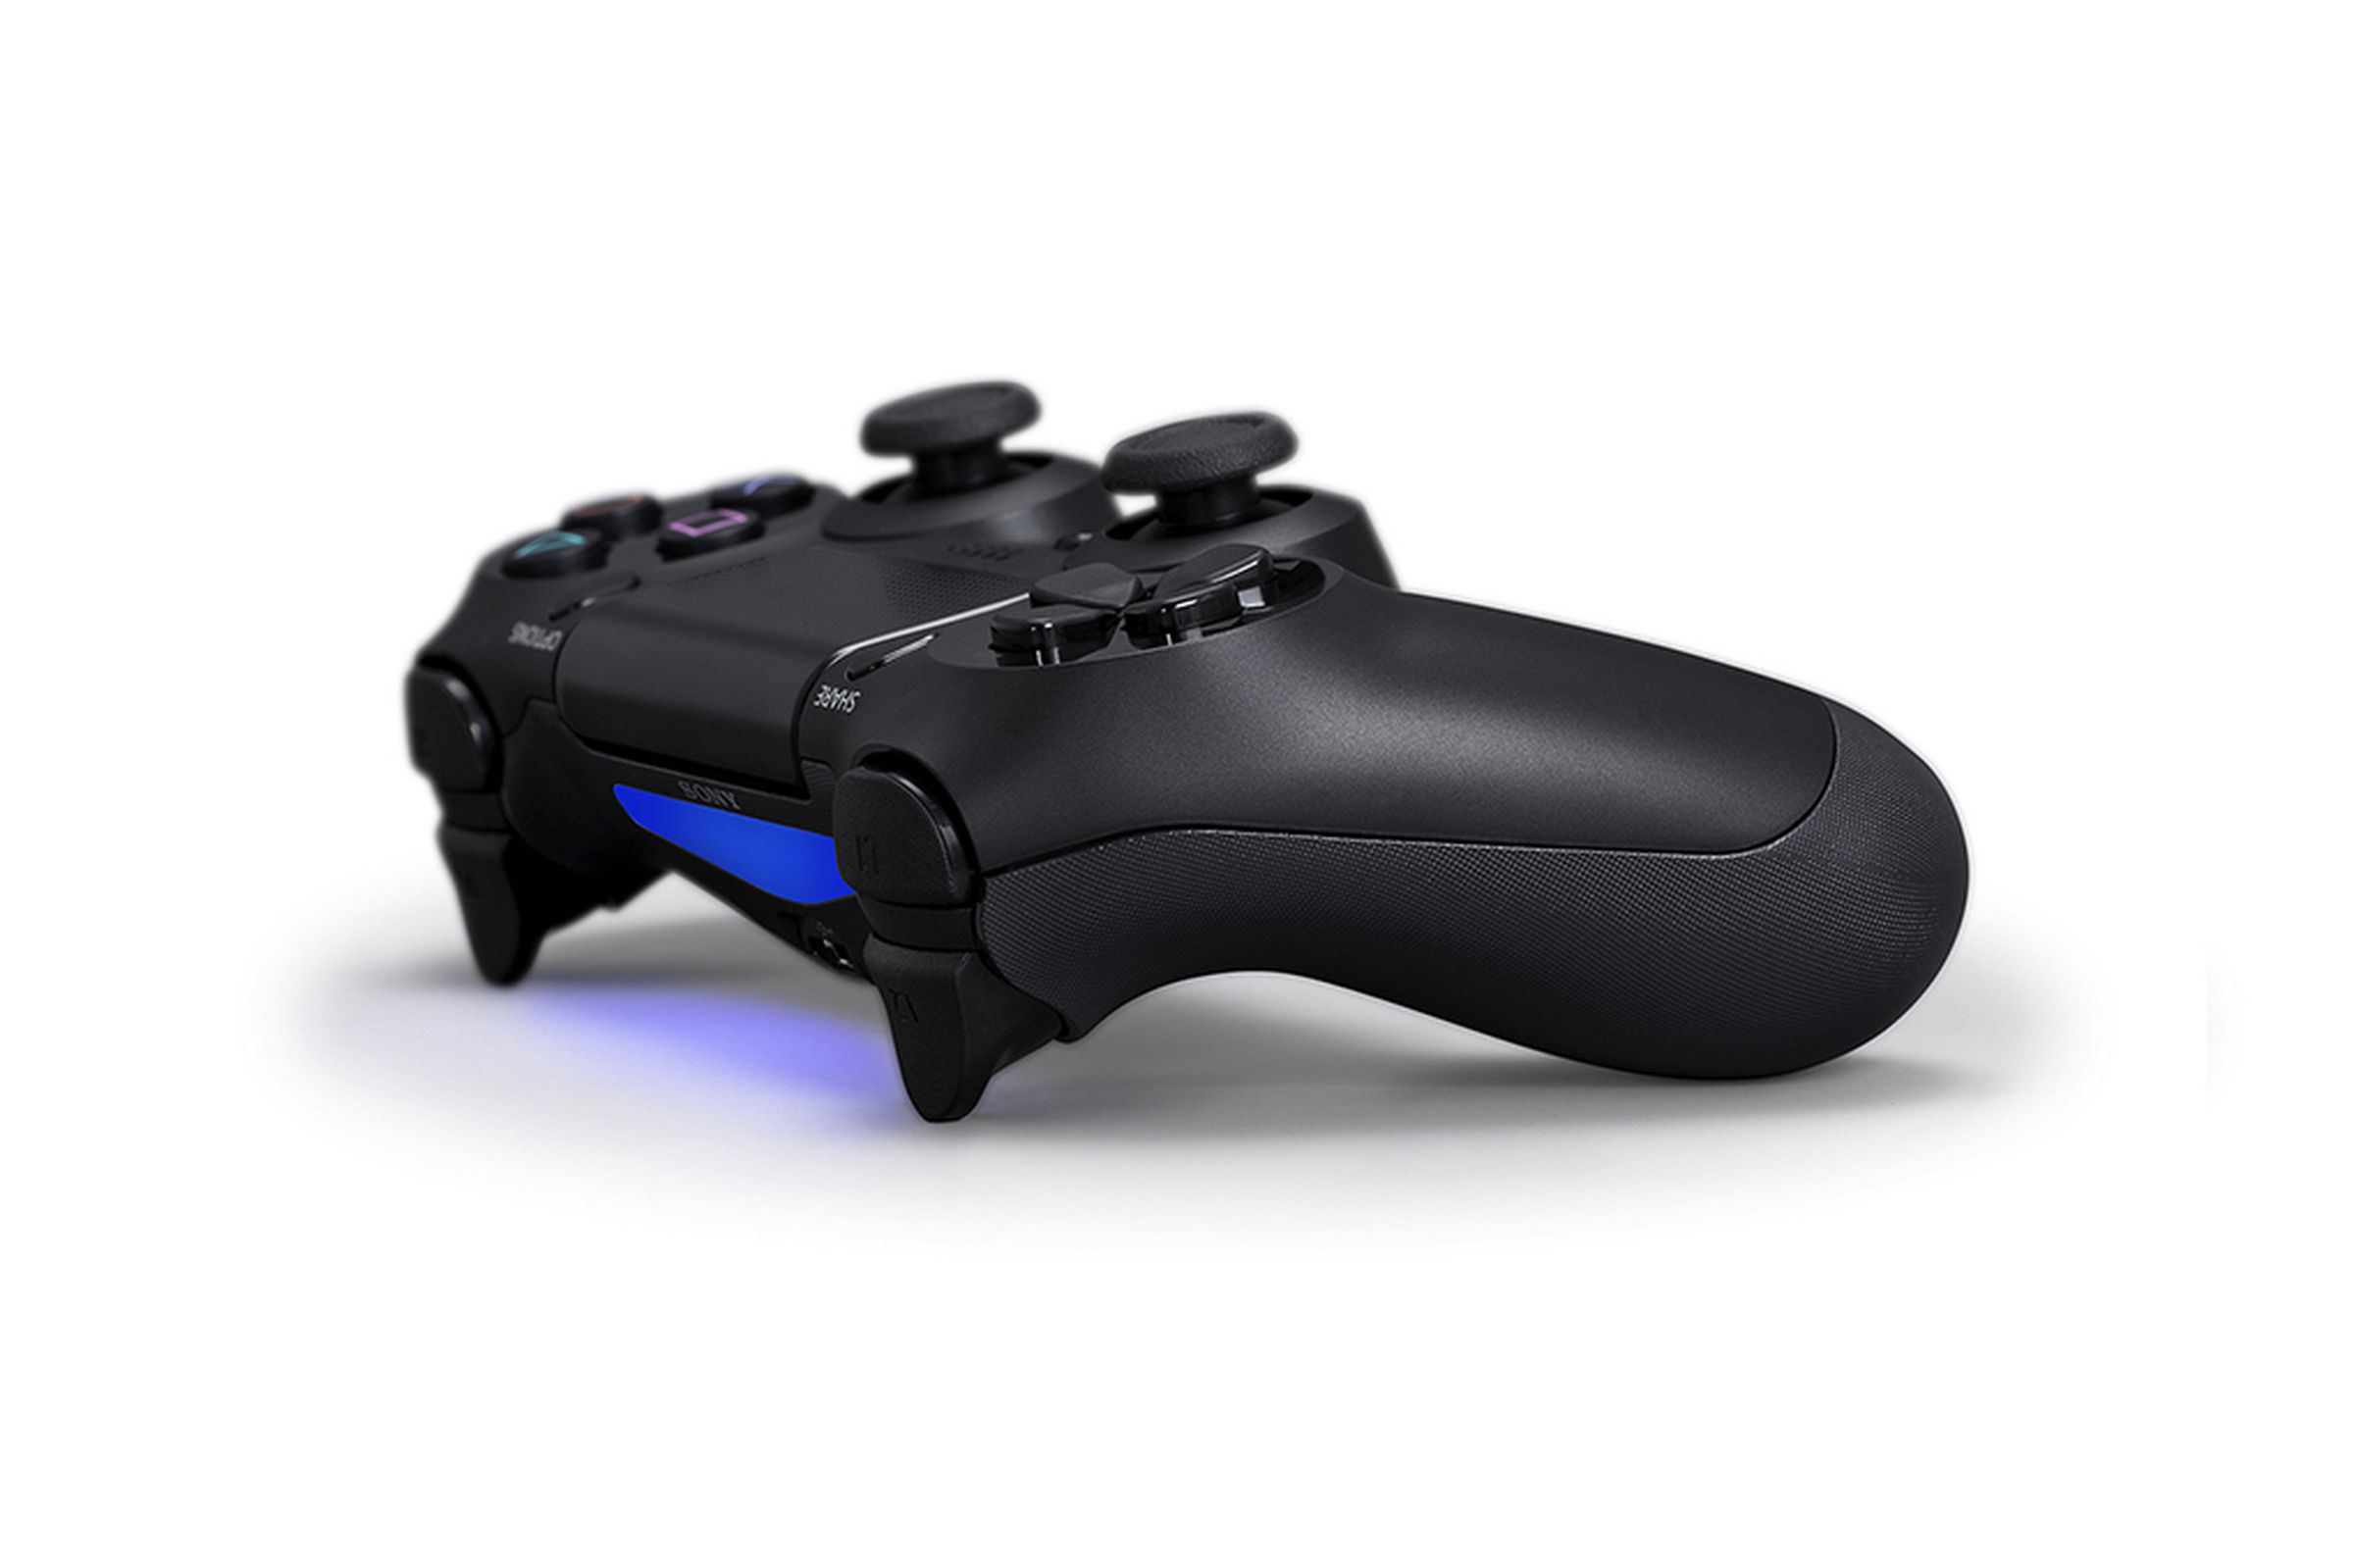 DualShock 4 controller and camera peripheral press images